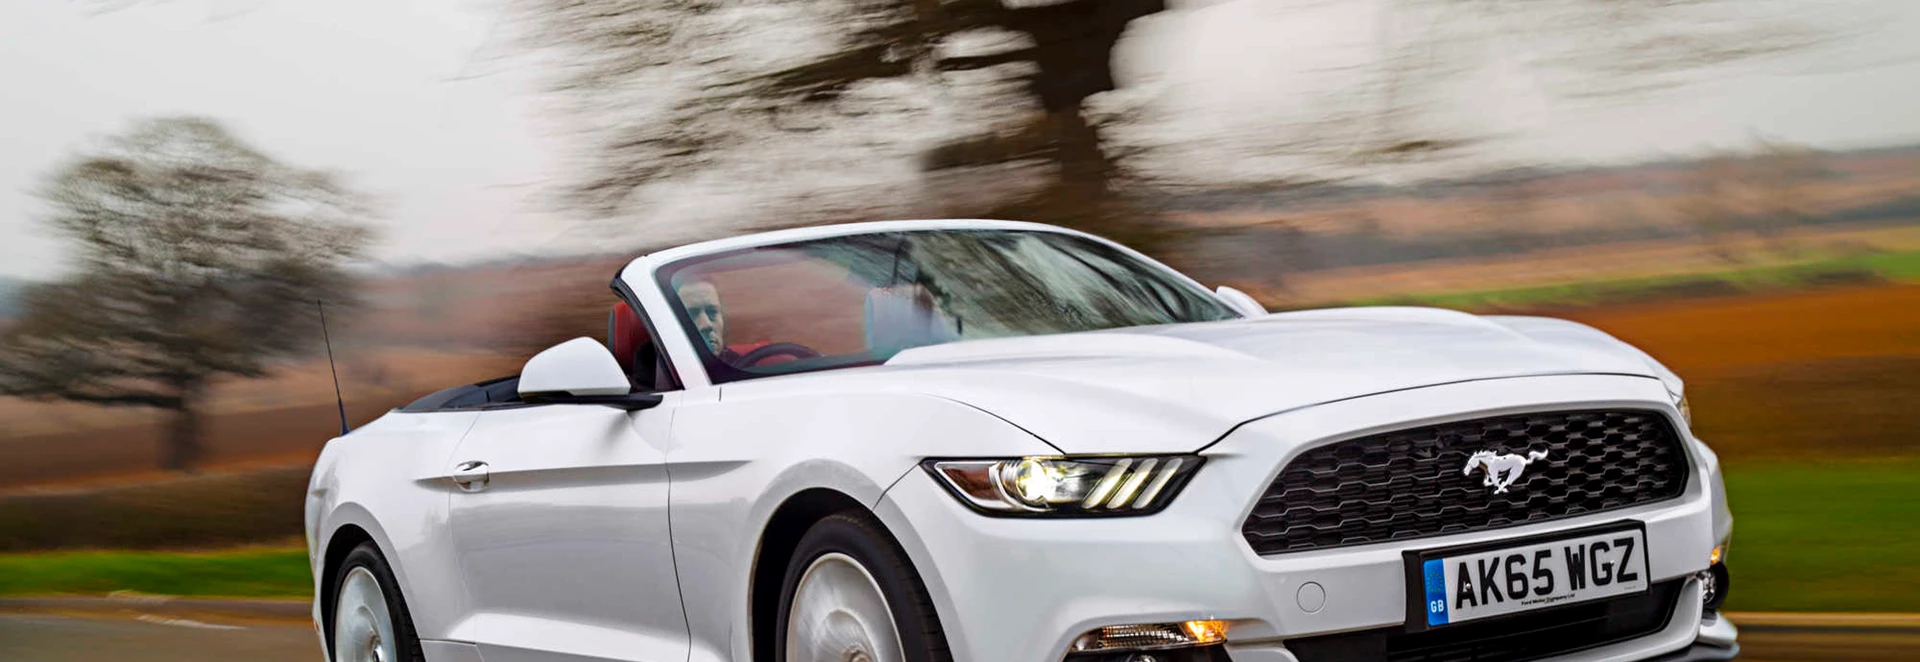 Ford Mustang Convertible review 